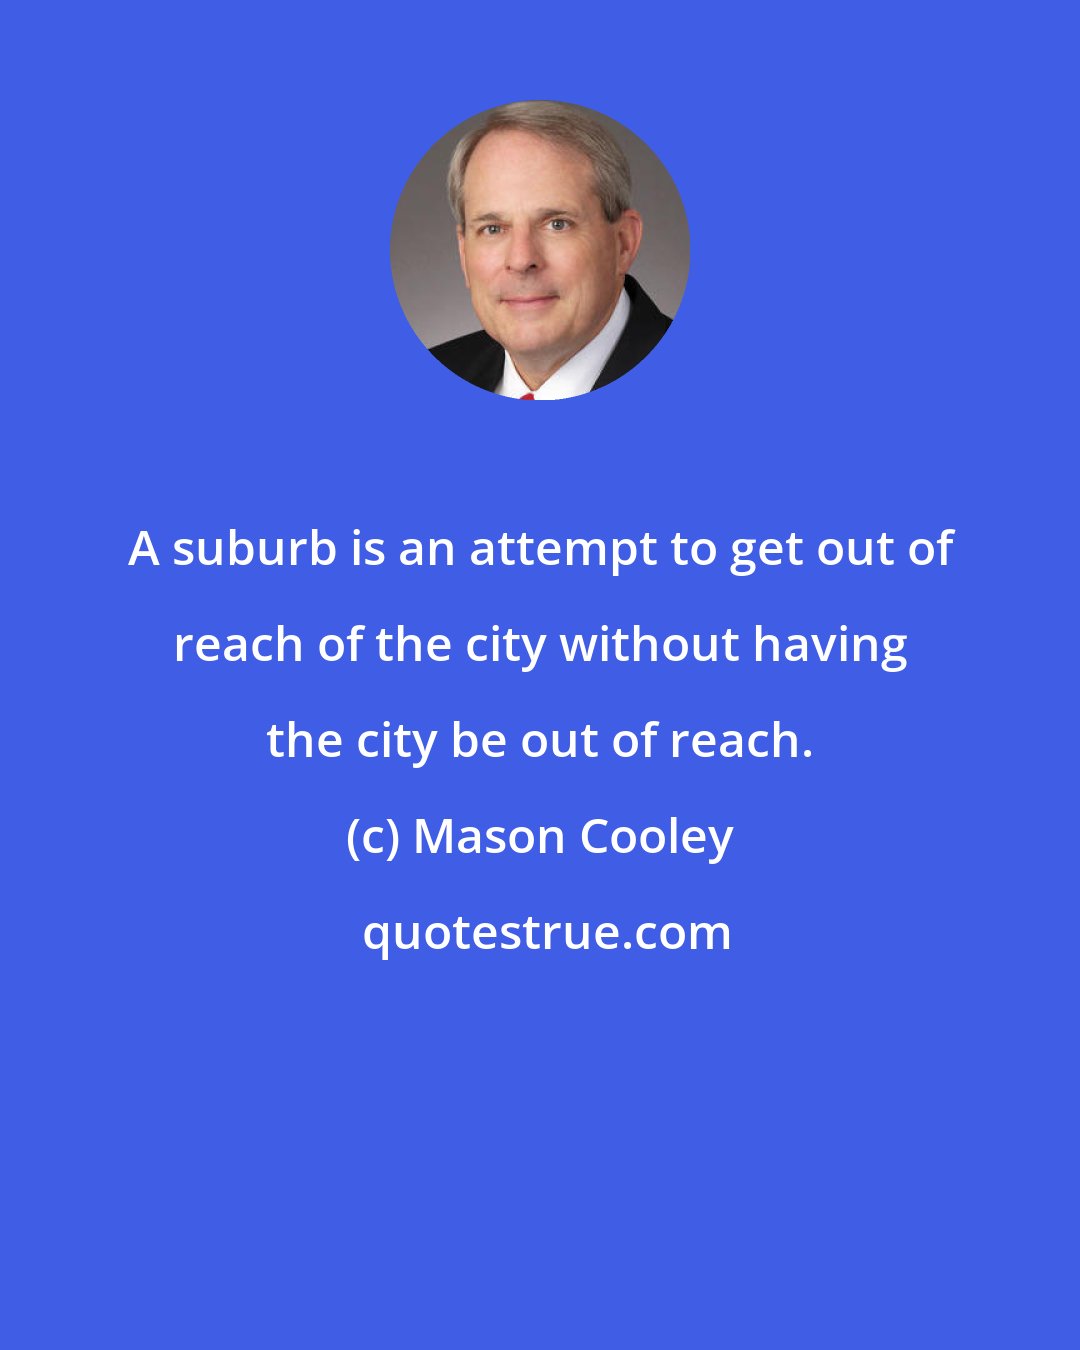 Mason Cooley: A suburb is an attempt to get out of reach of the city without having the city be out of reach.